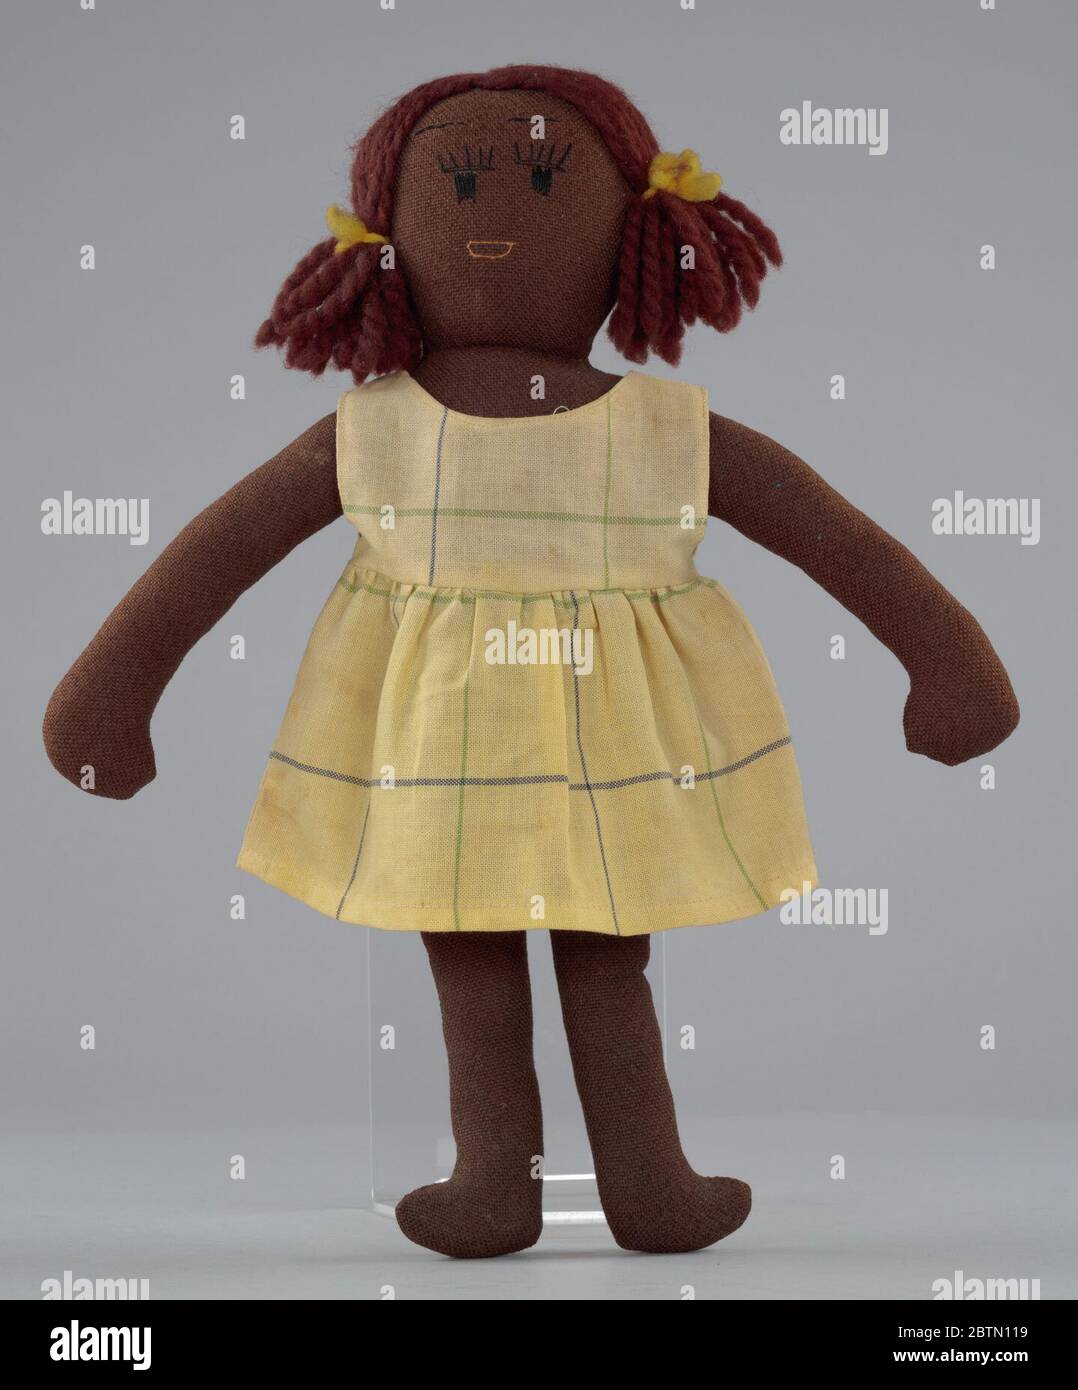 Female doll with tan clothing. A female cloth doll with tan clothing. The doll is wearing a tan dress with stripes. The doll's hair is in pigtails with cloth bows. Stock Photo